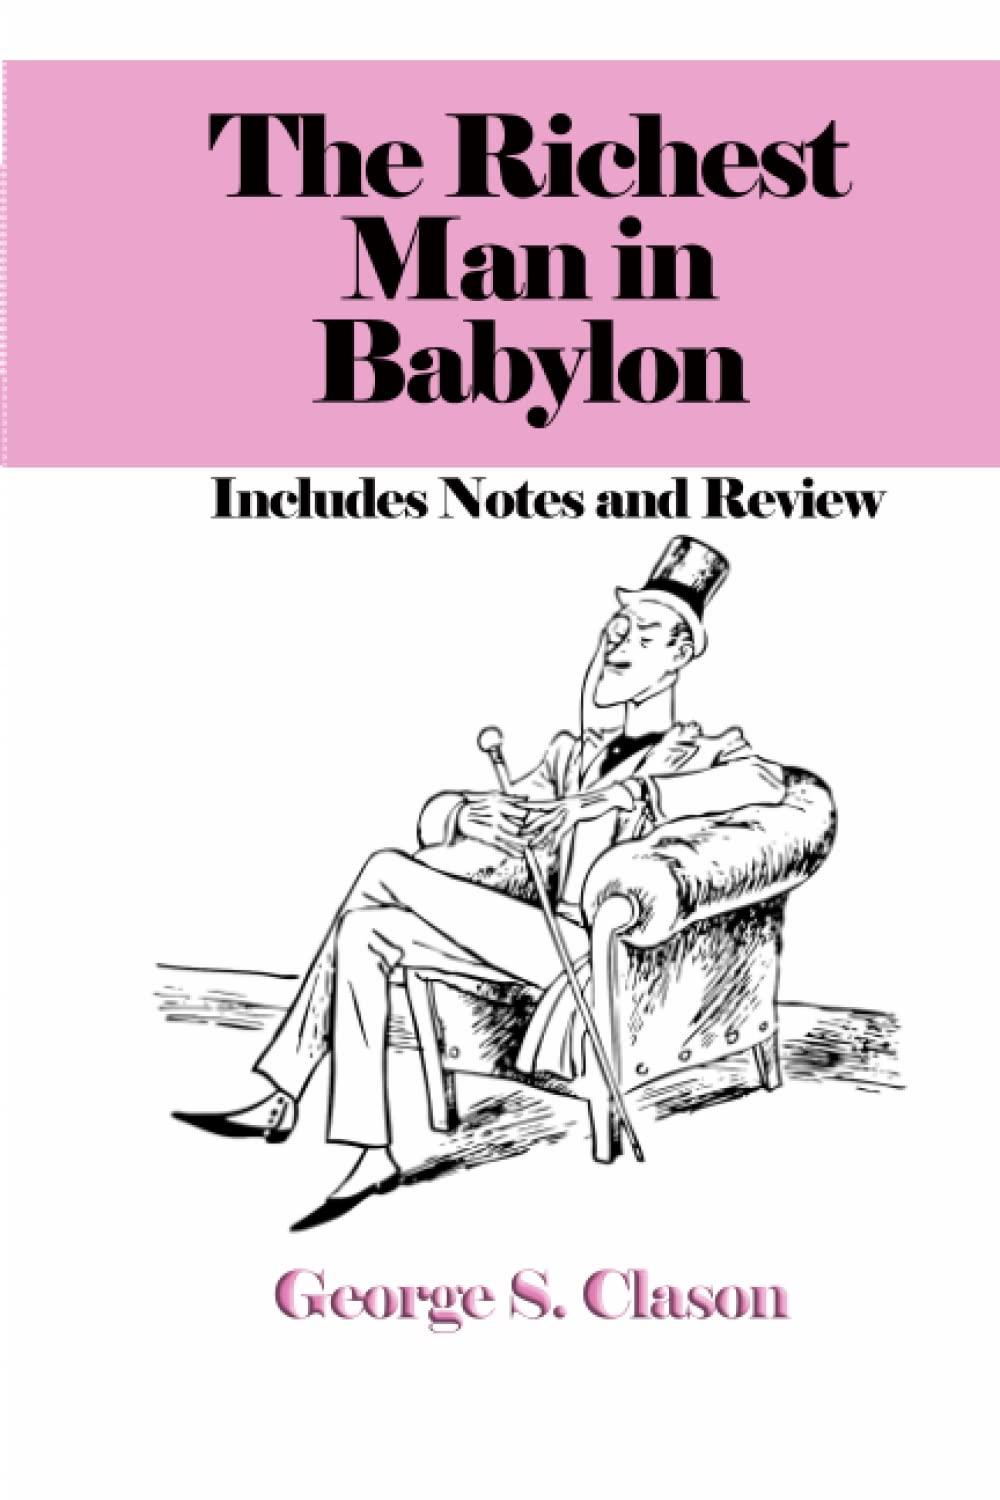 the richest man in babylon includes notes and review 1st edition george s. clason, amanda f. orwell